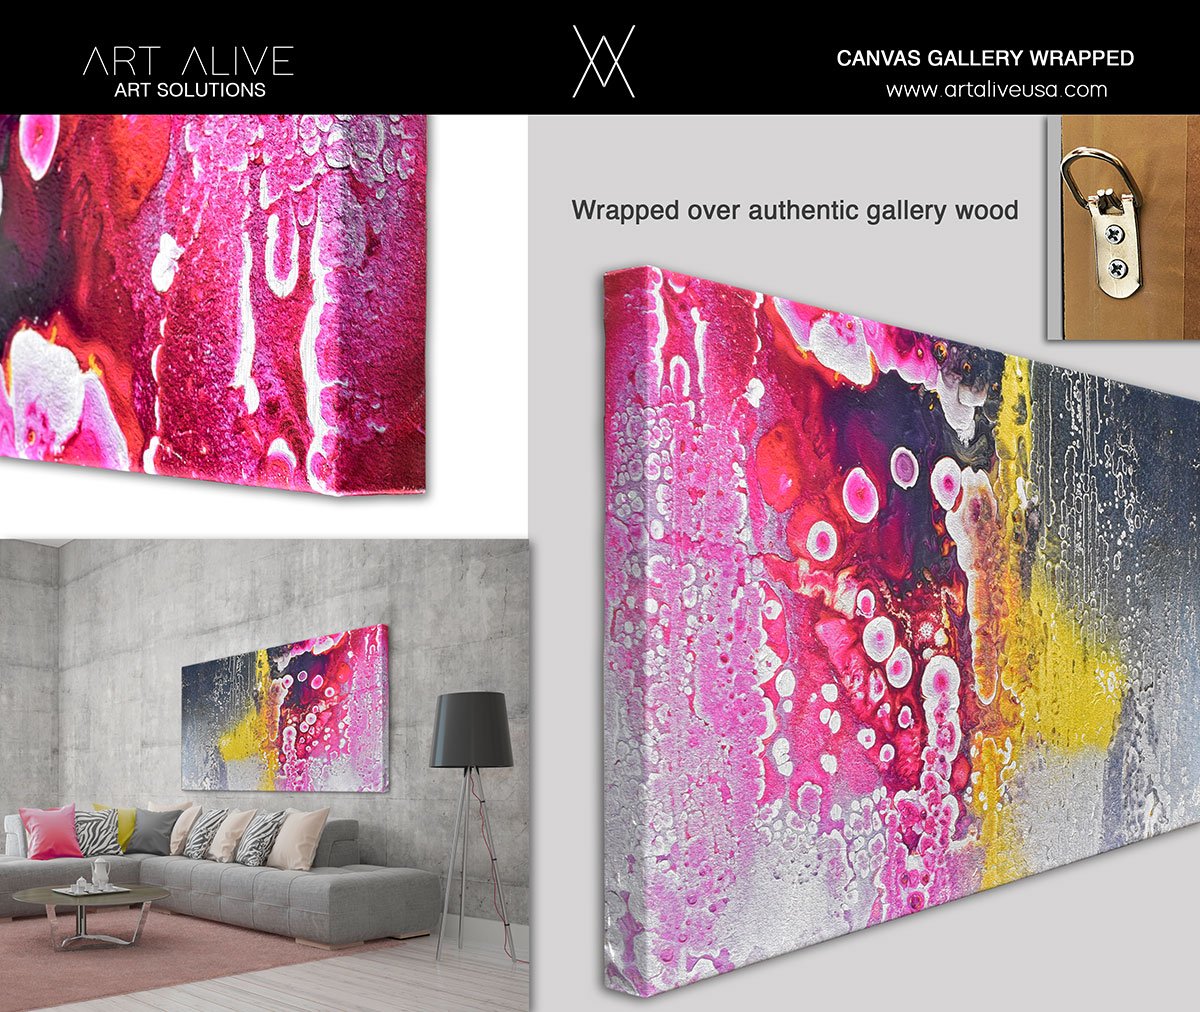 ART ON CANVAS RETOUCHED, GALLERY WRAPPED